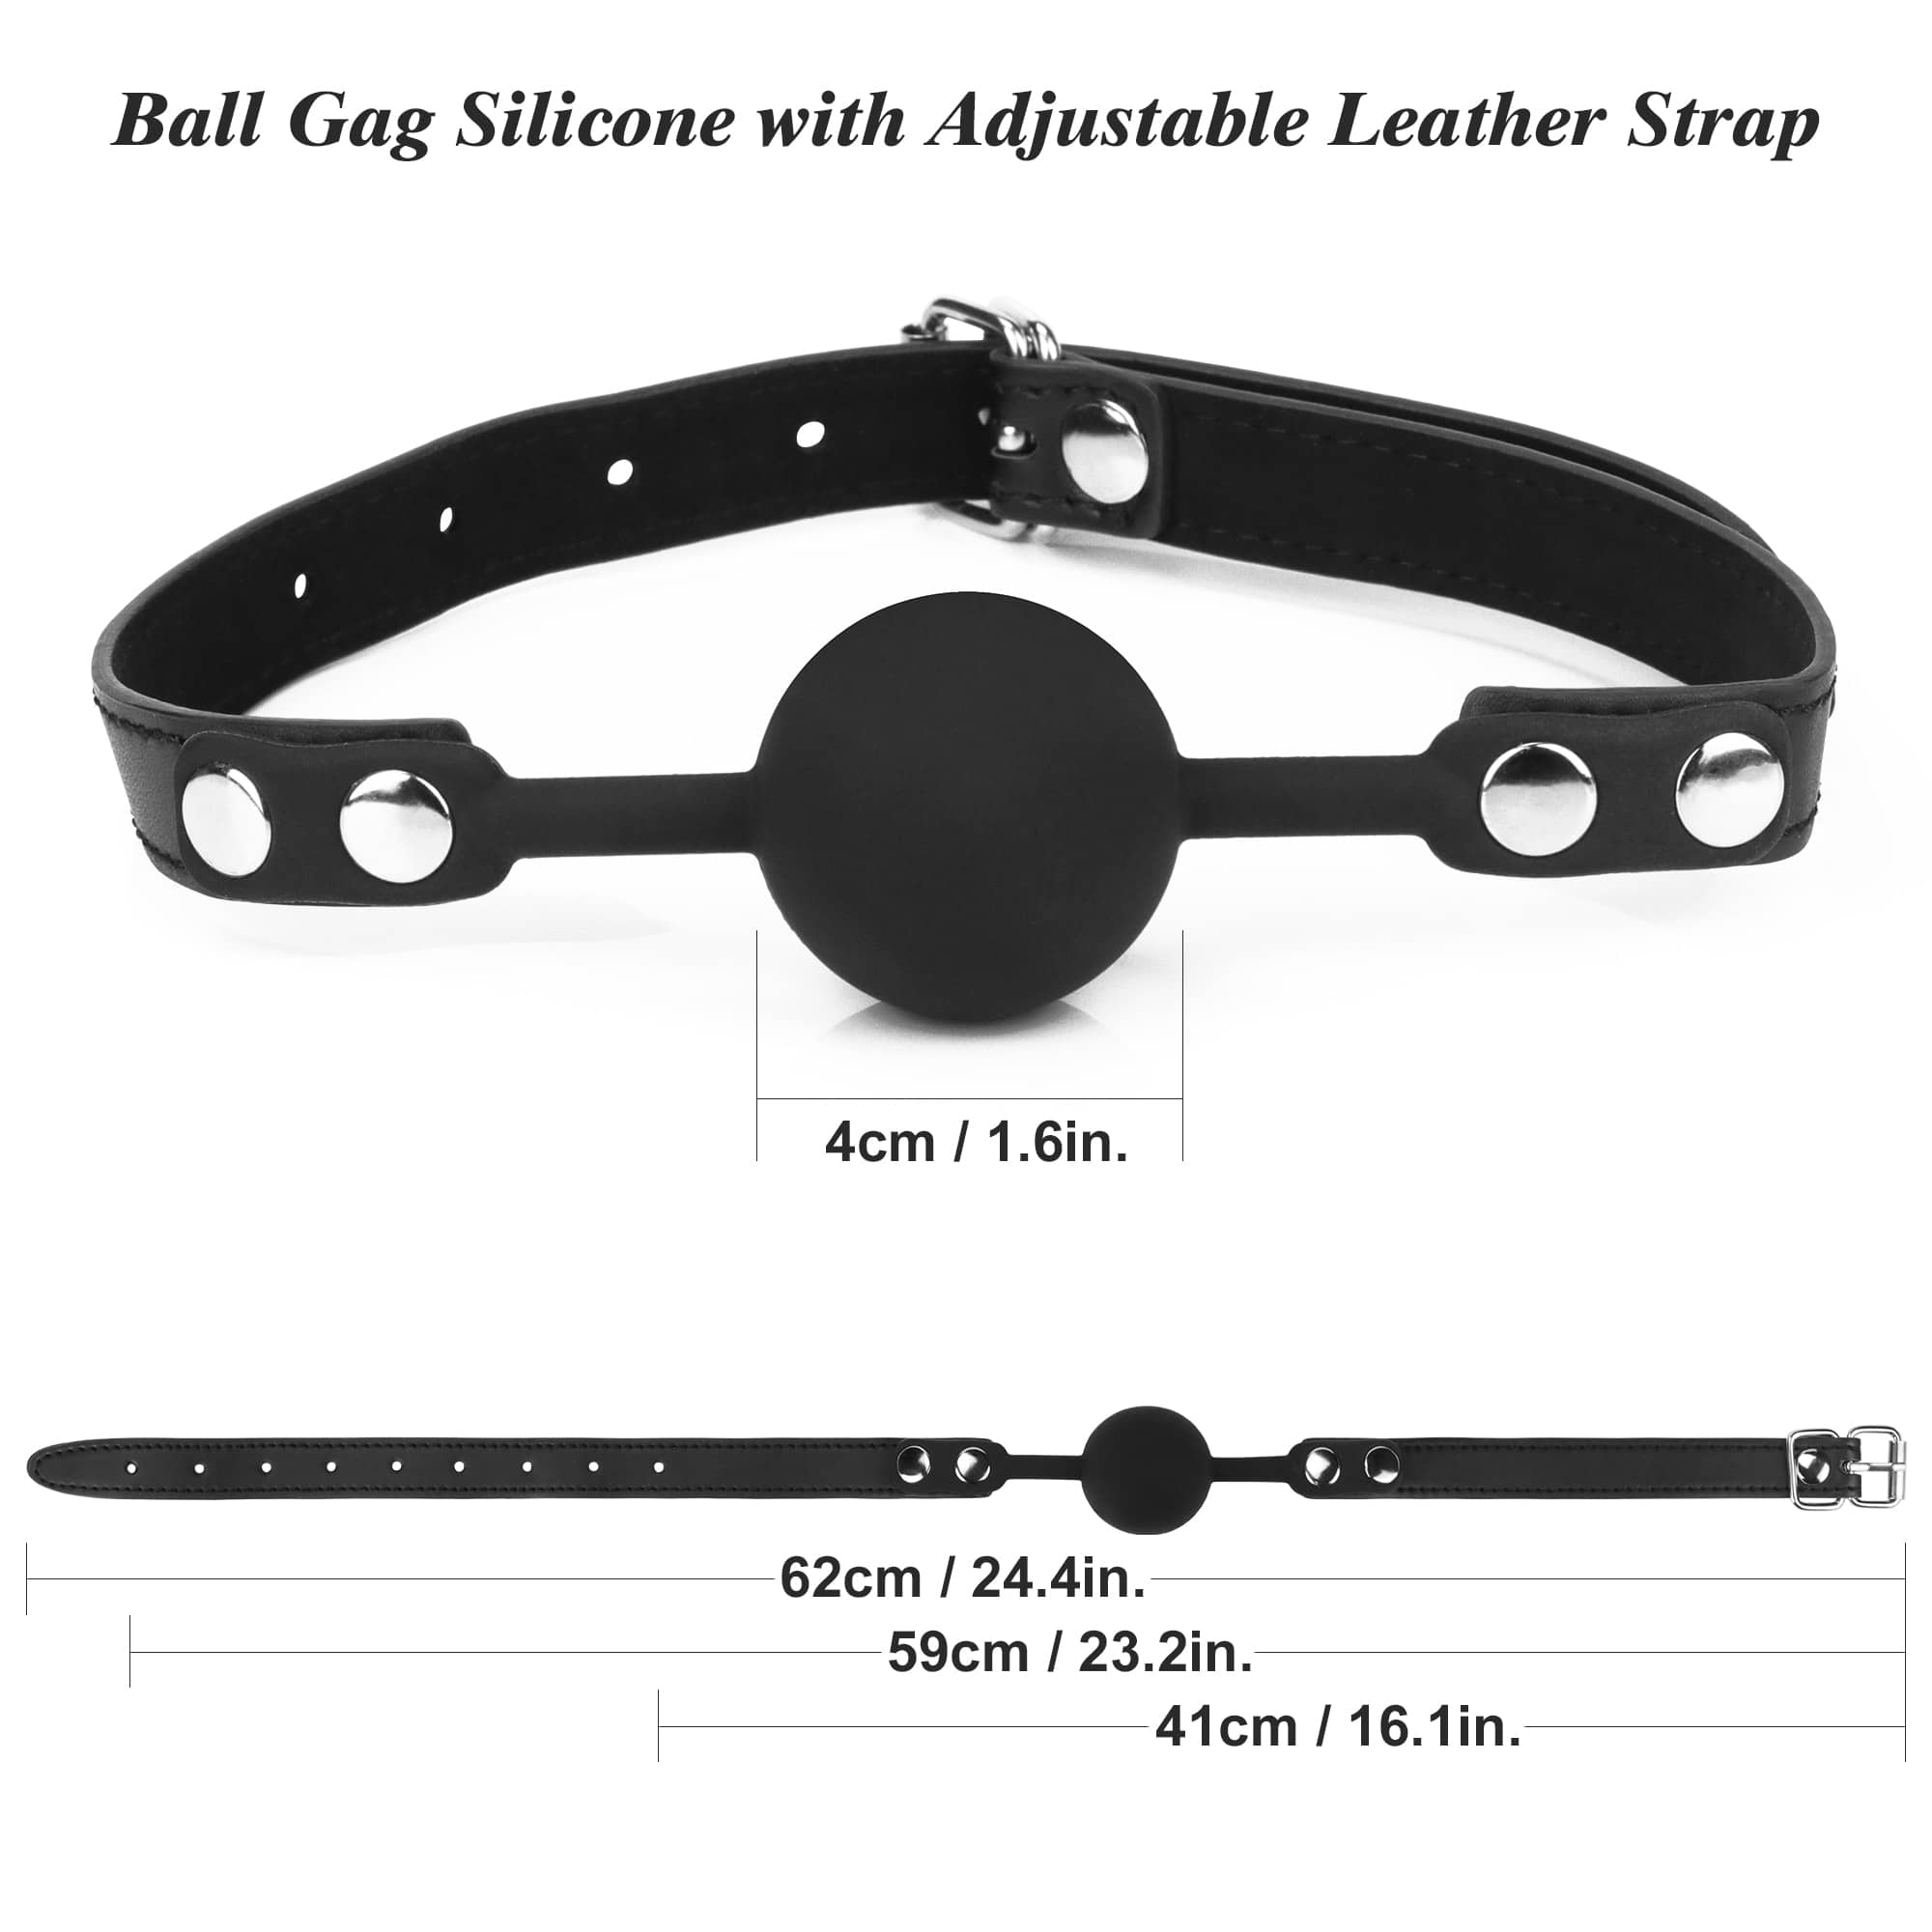 The size of the silicone ball gag of the bdsm bondage sets